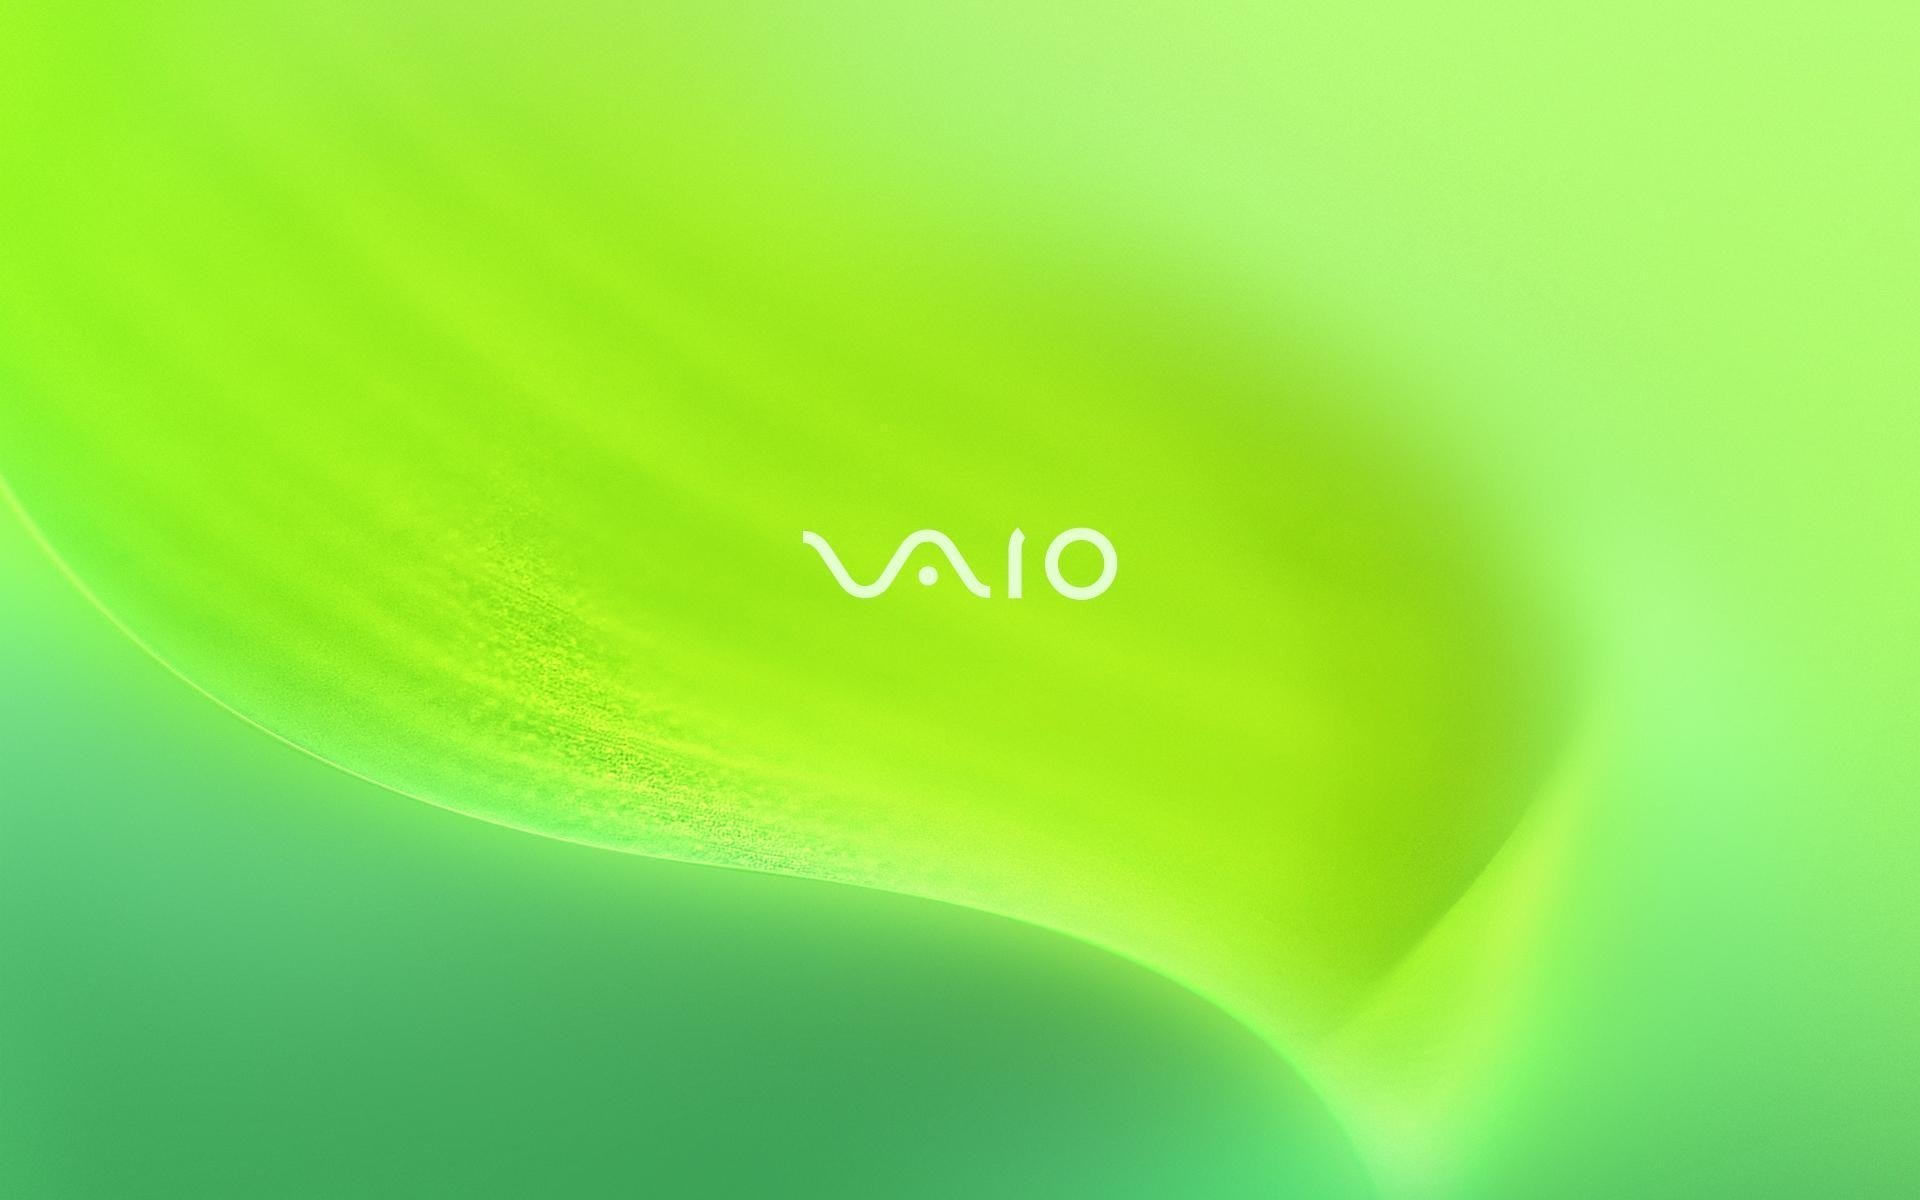 Vaio Hd Wallpaper Background Image 19x10 Id Wallpaper Abyss